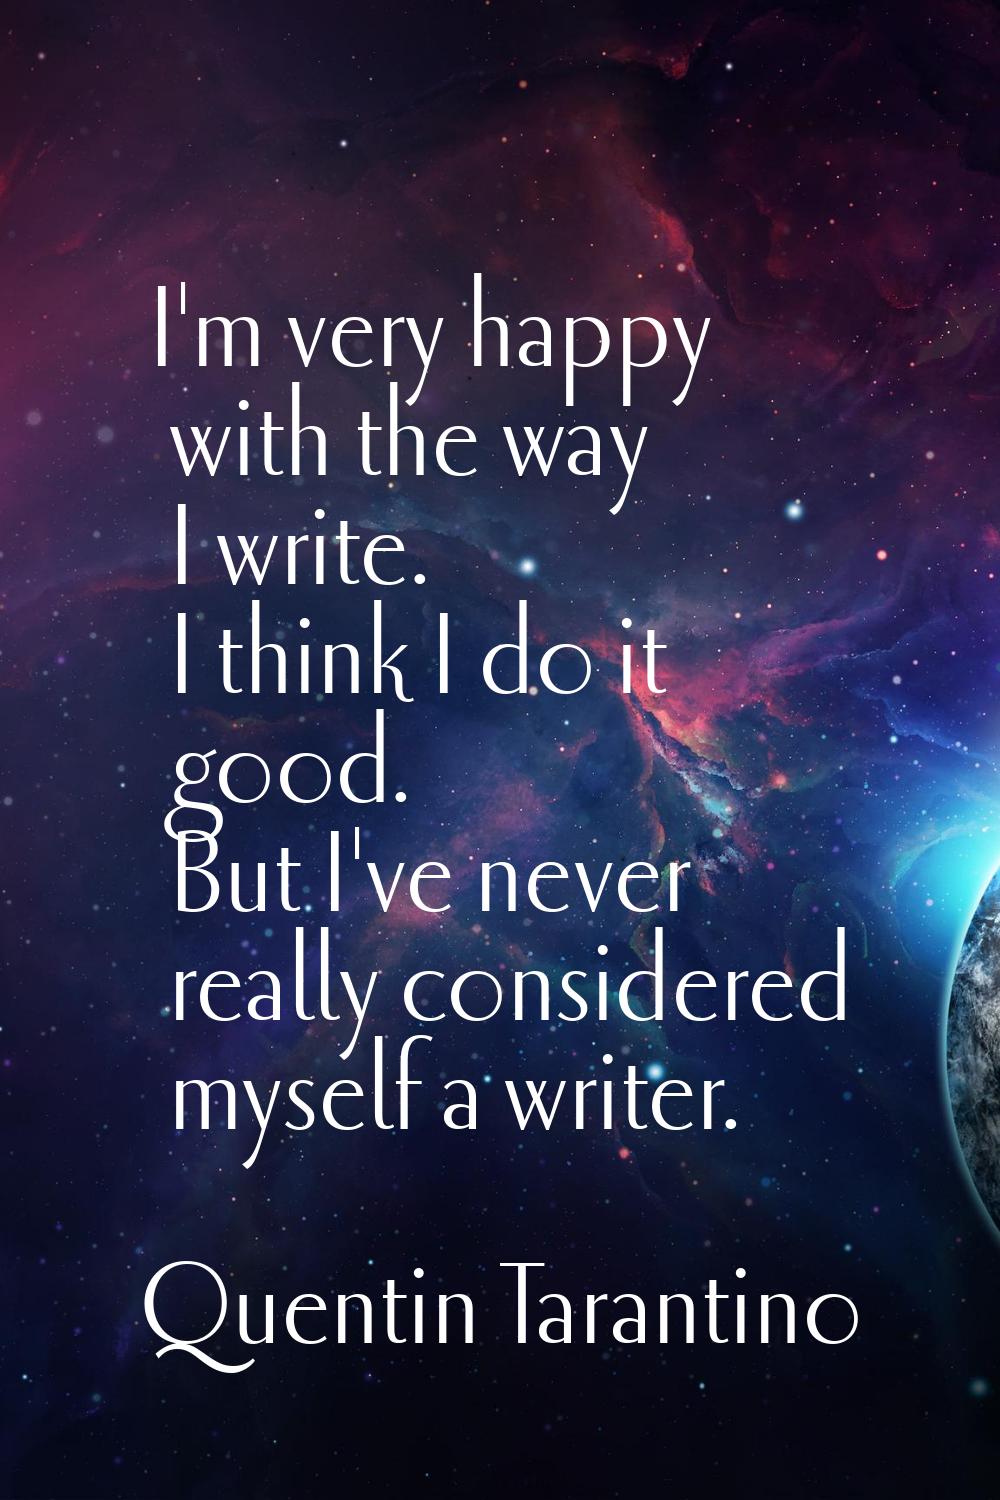 I'm very happy with the way I write. I think I do it good. But I've never really considered myself 